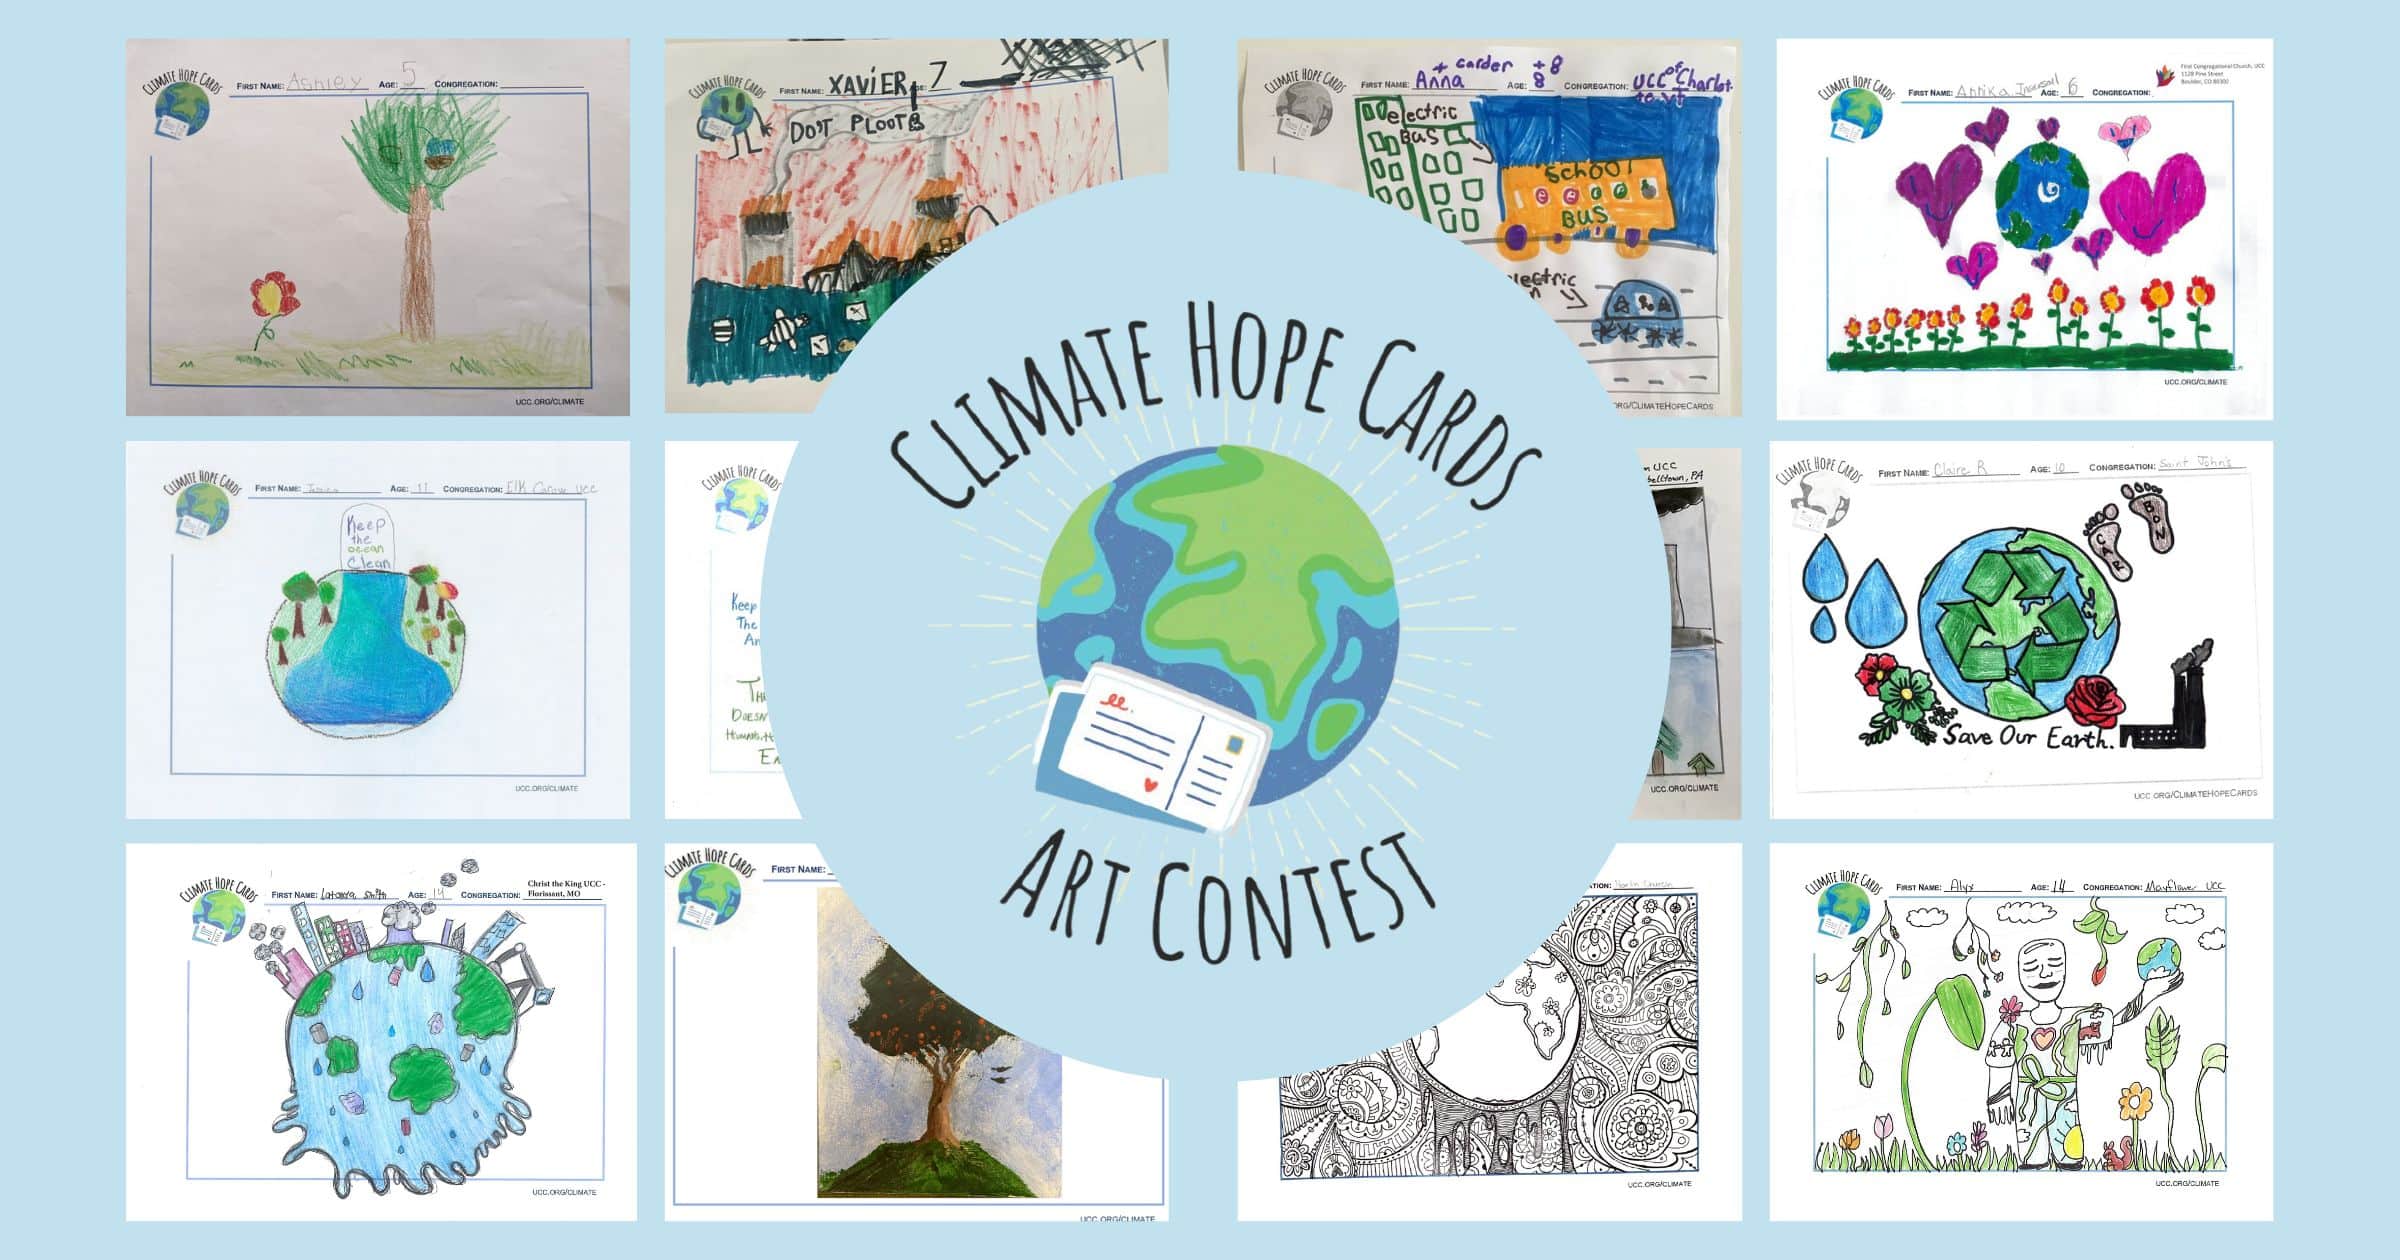 Climate Hope Cards contest winners to be announced Jan. 14